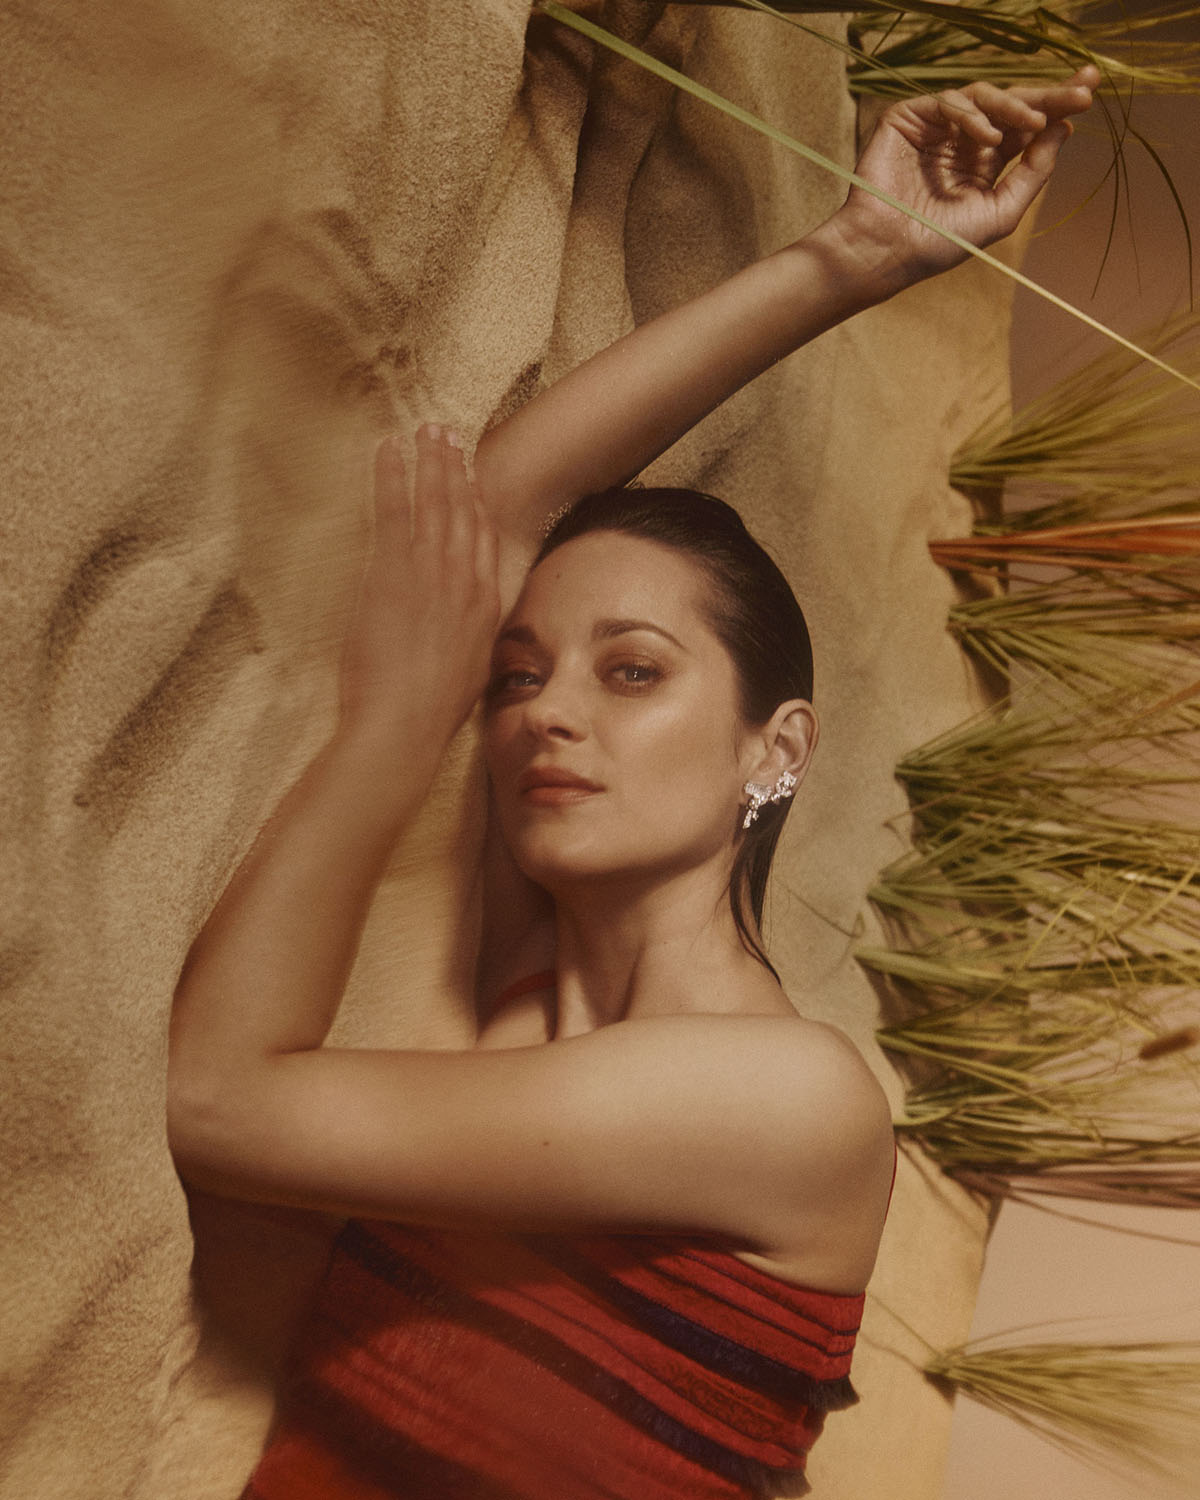 Marion Cotillard covers Marie Claire France July 2021 by Van Mossevelde + N